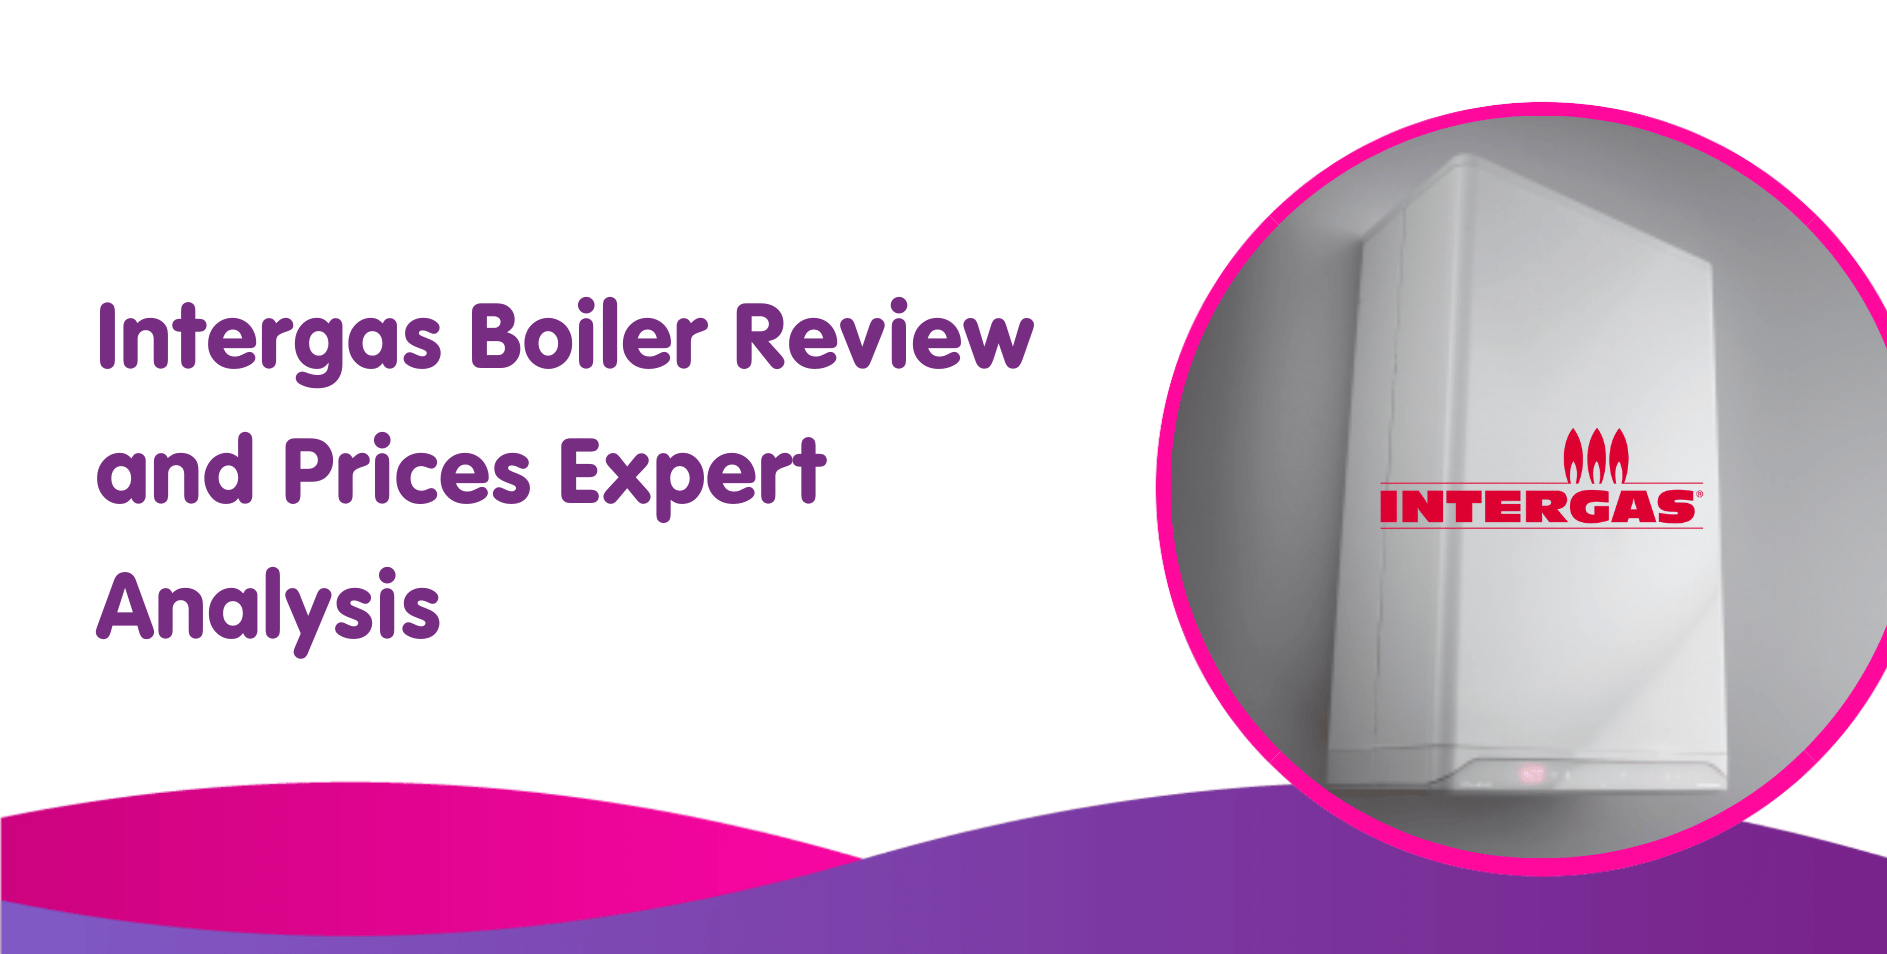 Intergas Boiler Review and Prices Expert Analysis